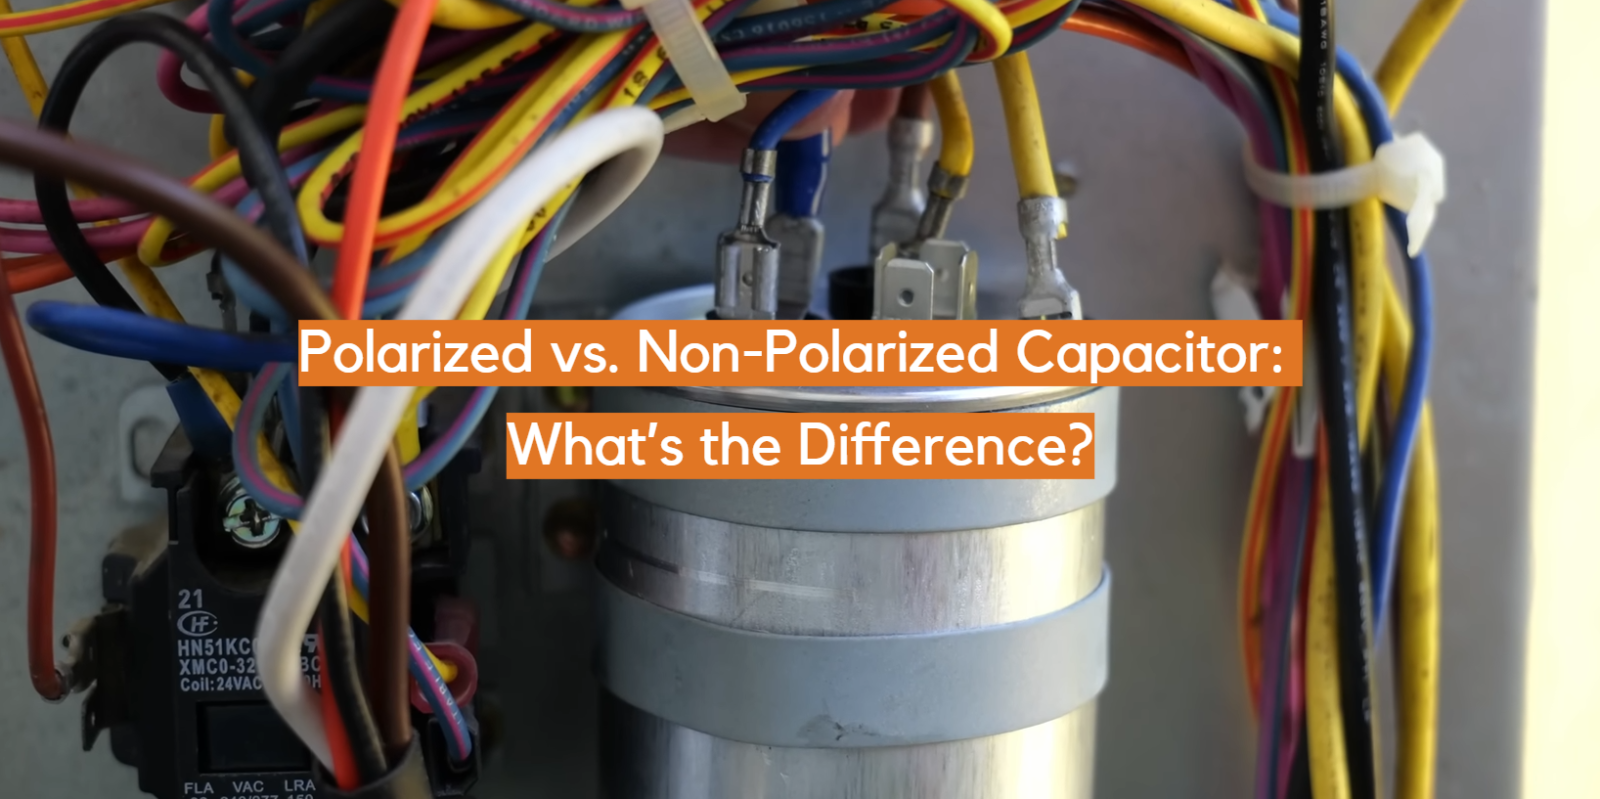 Polarized vs. Non-Polarized Capacitor: What’s the Difference?